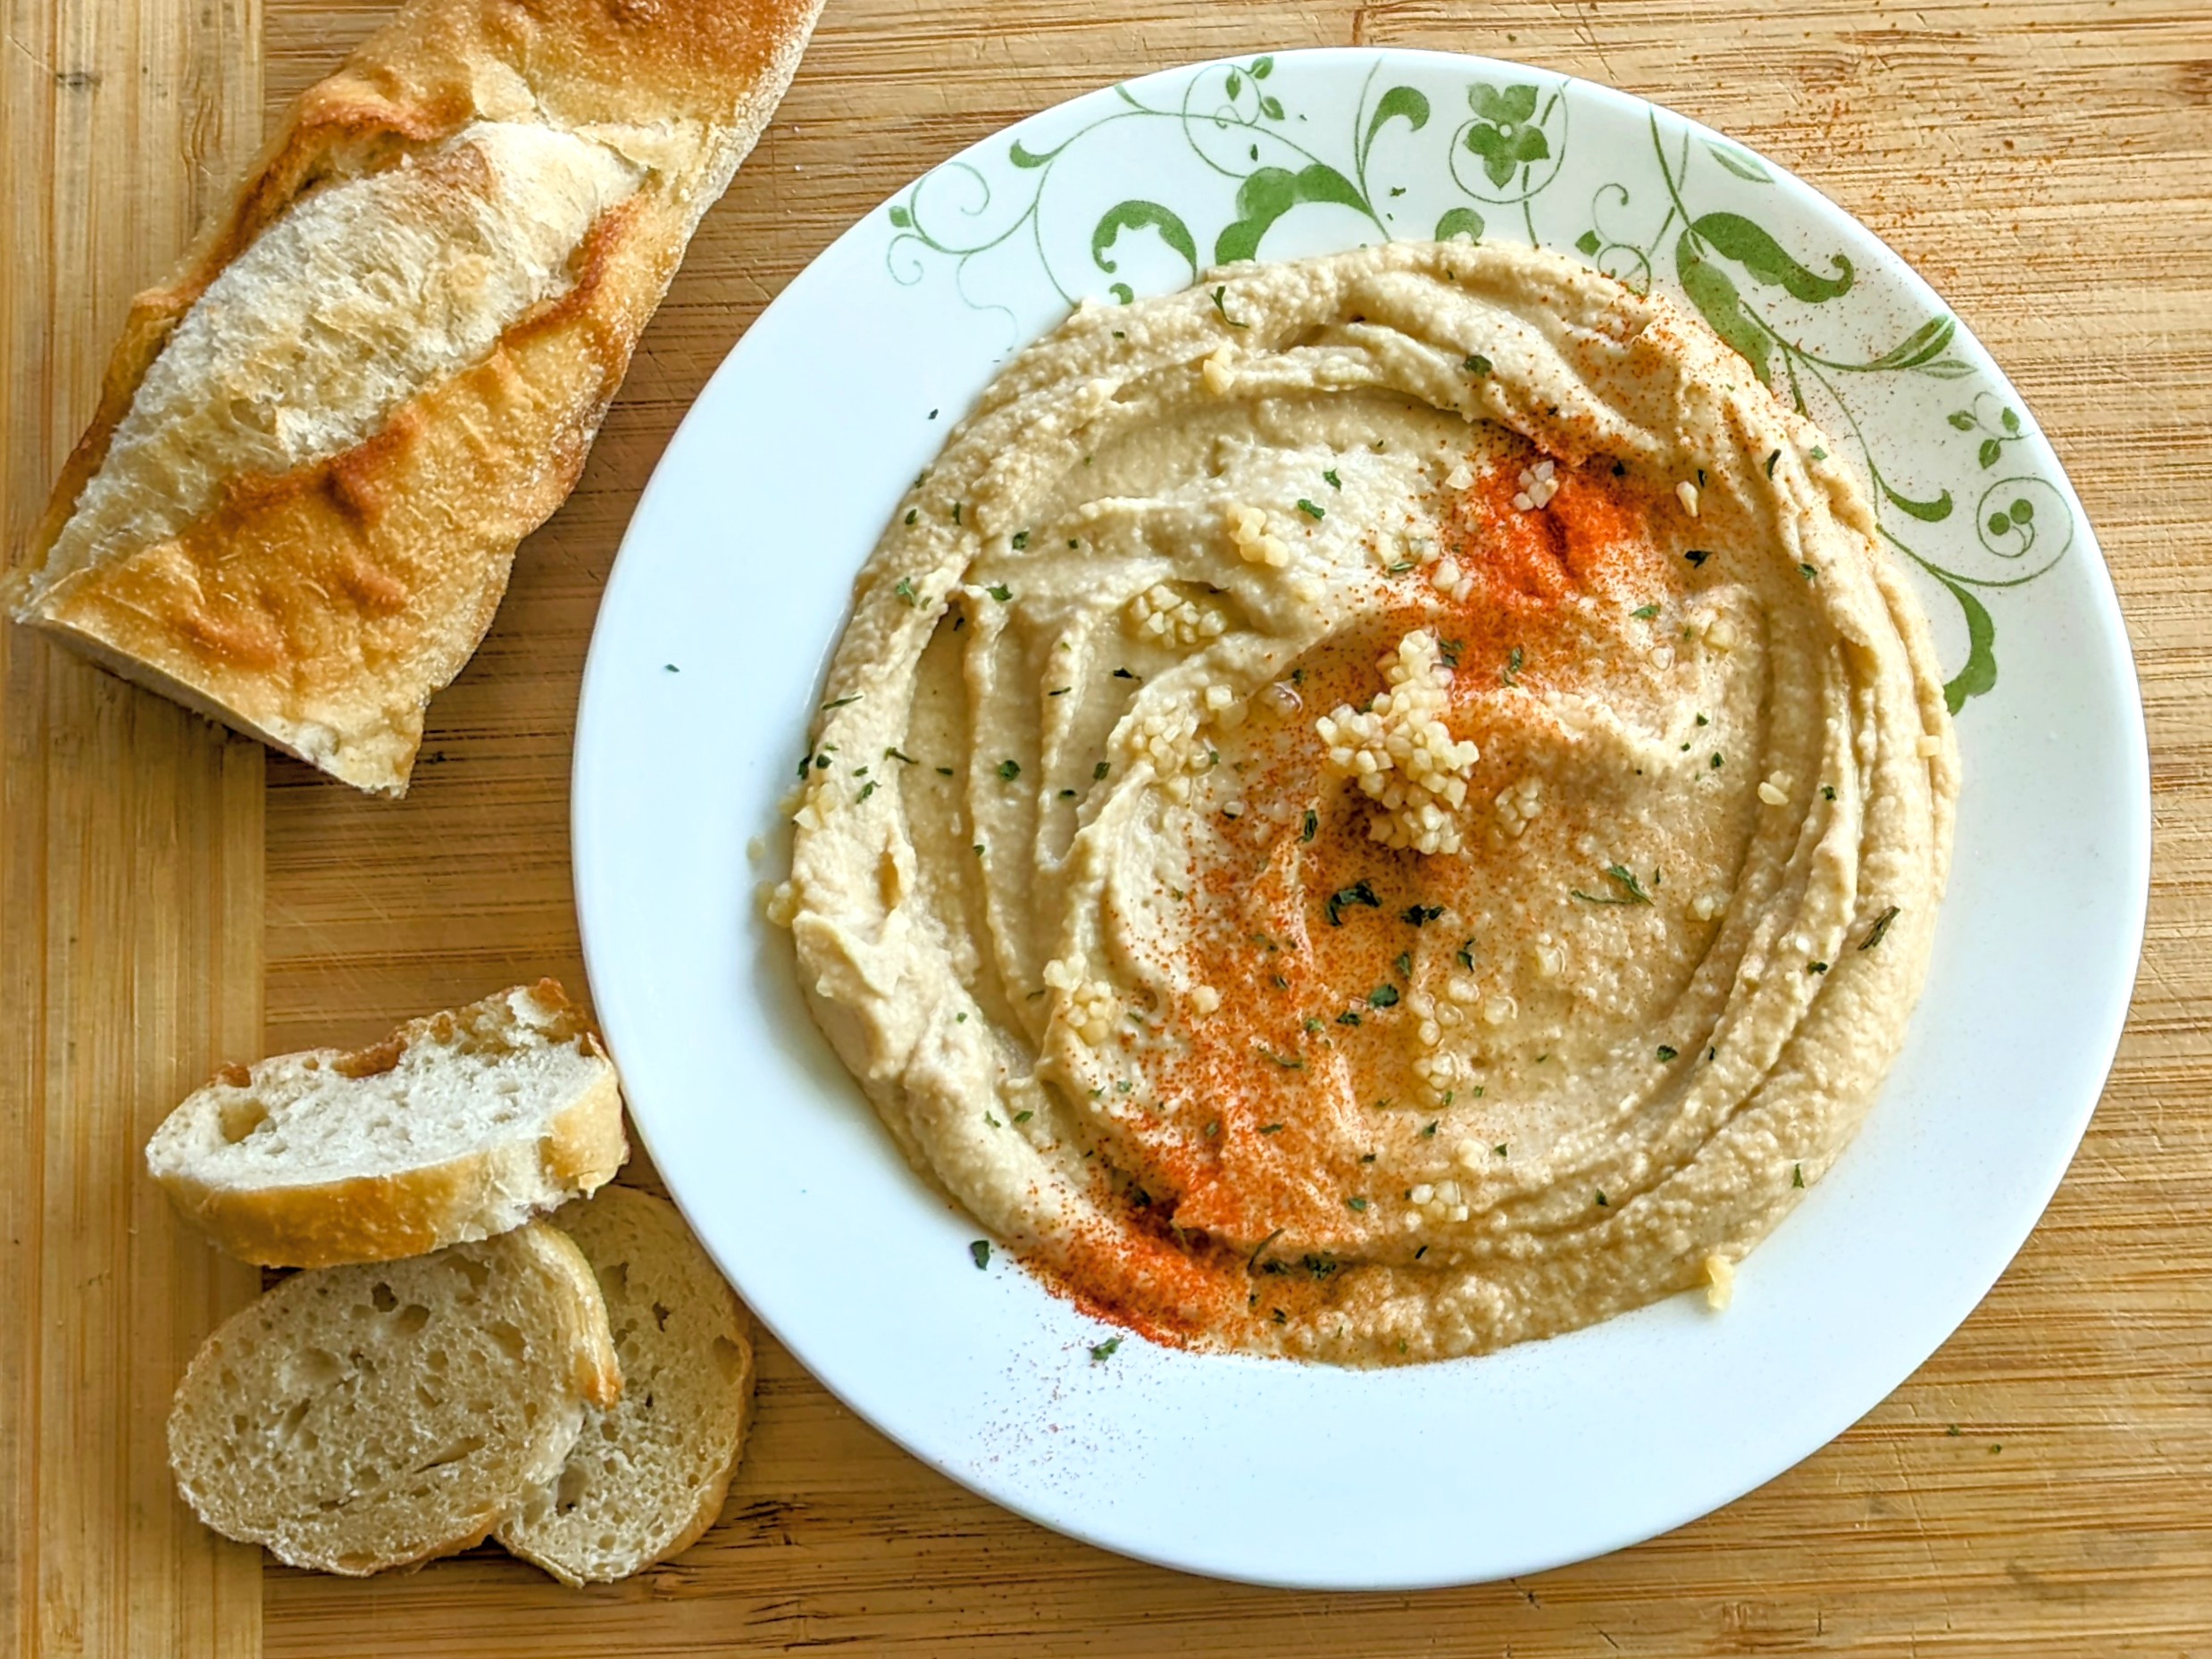 Photograph of the BEST hummus ever dusted in paprika, parsley, and minced garlic with baguette